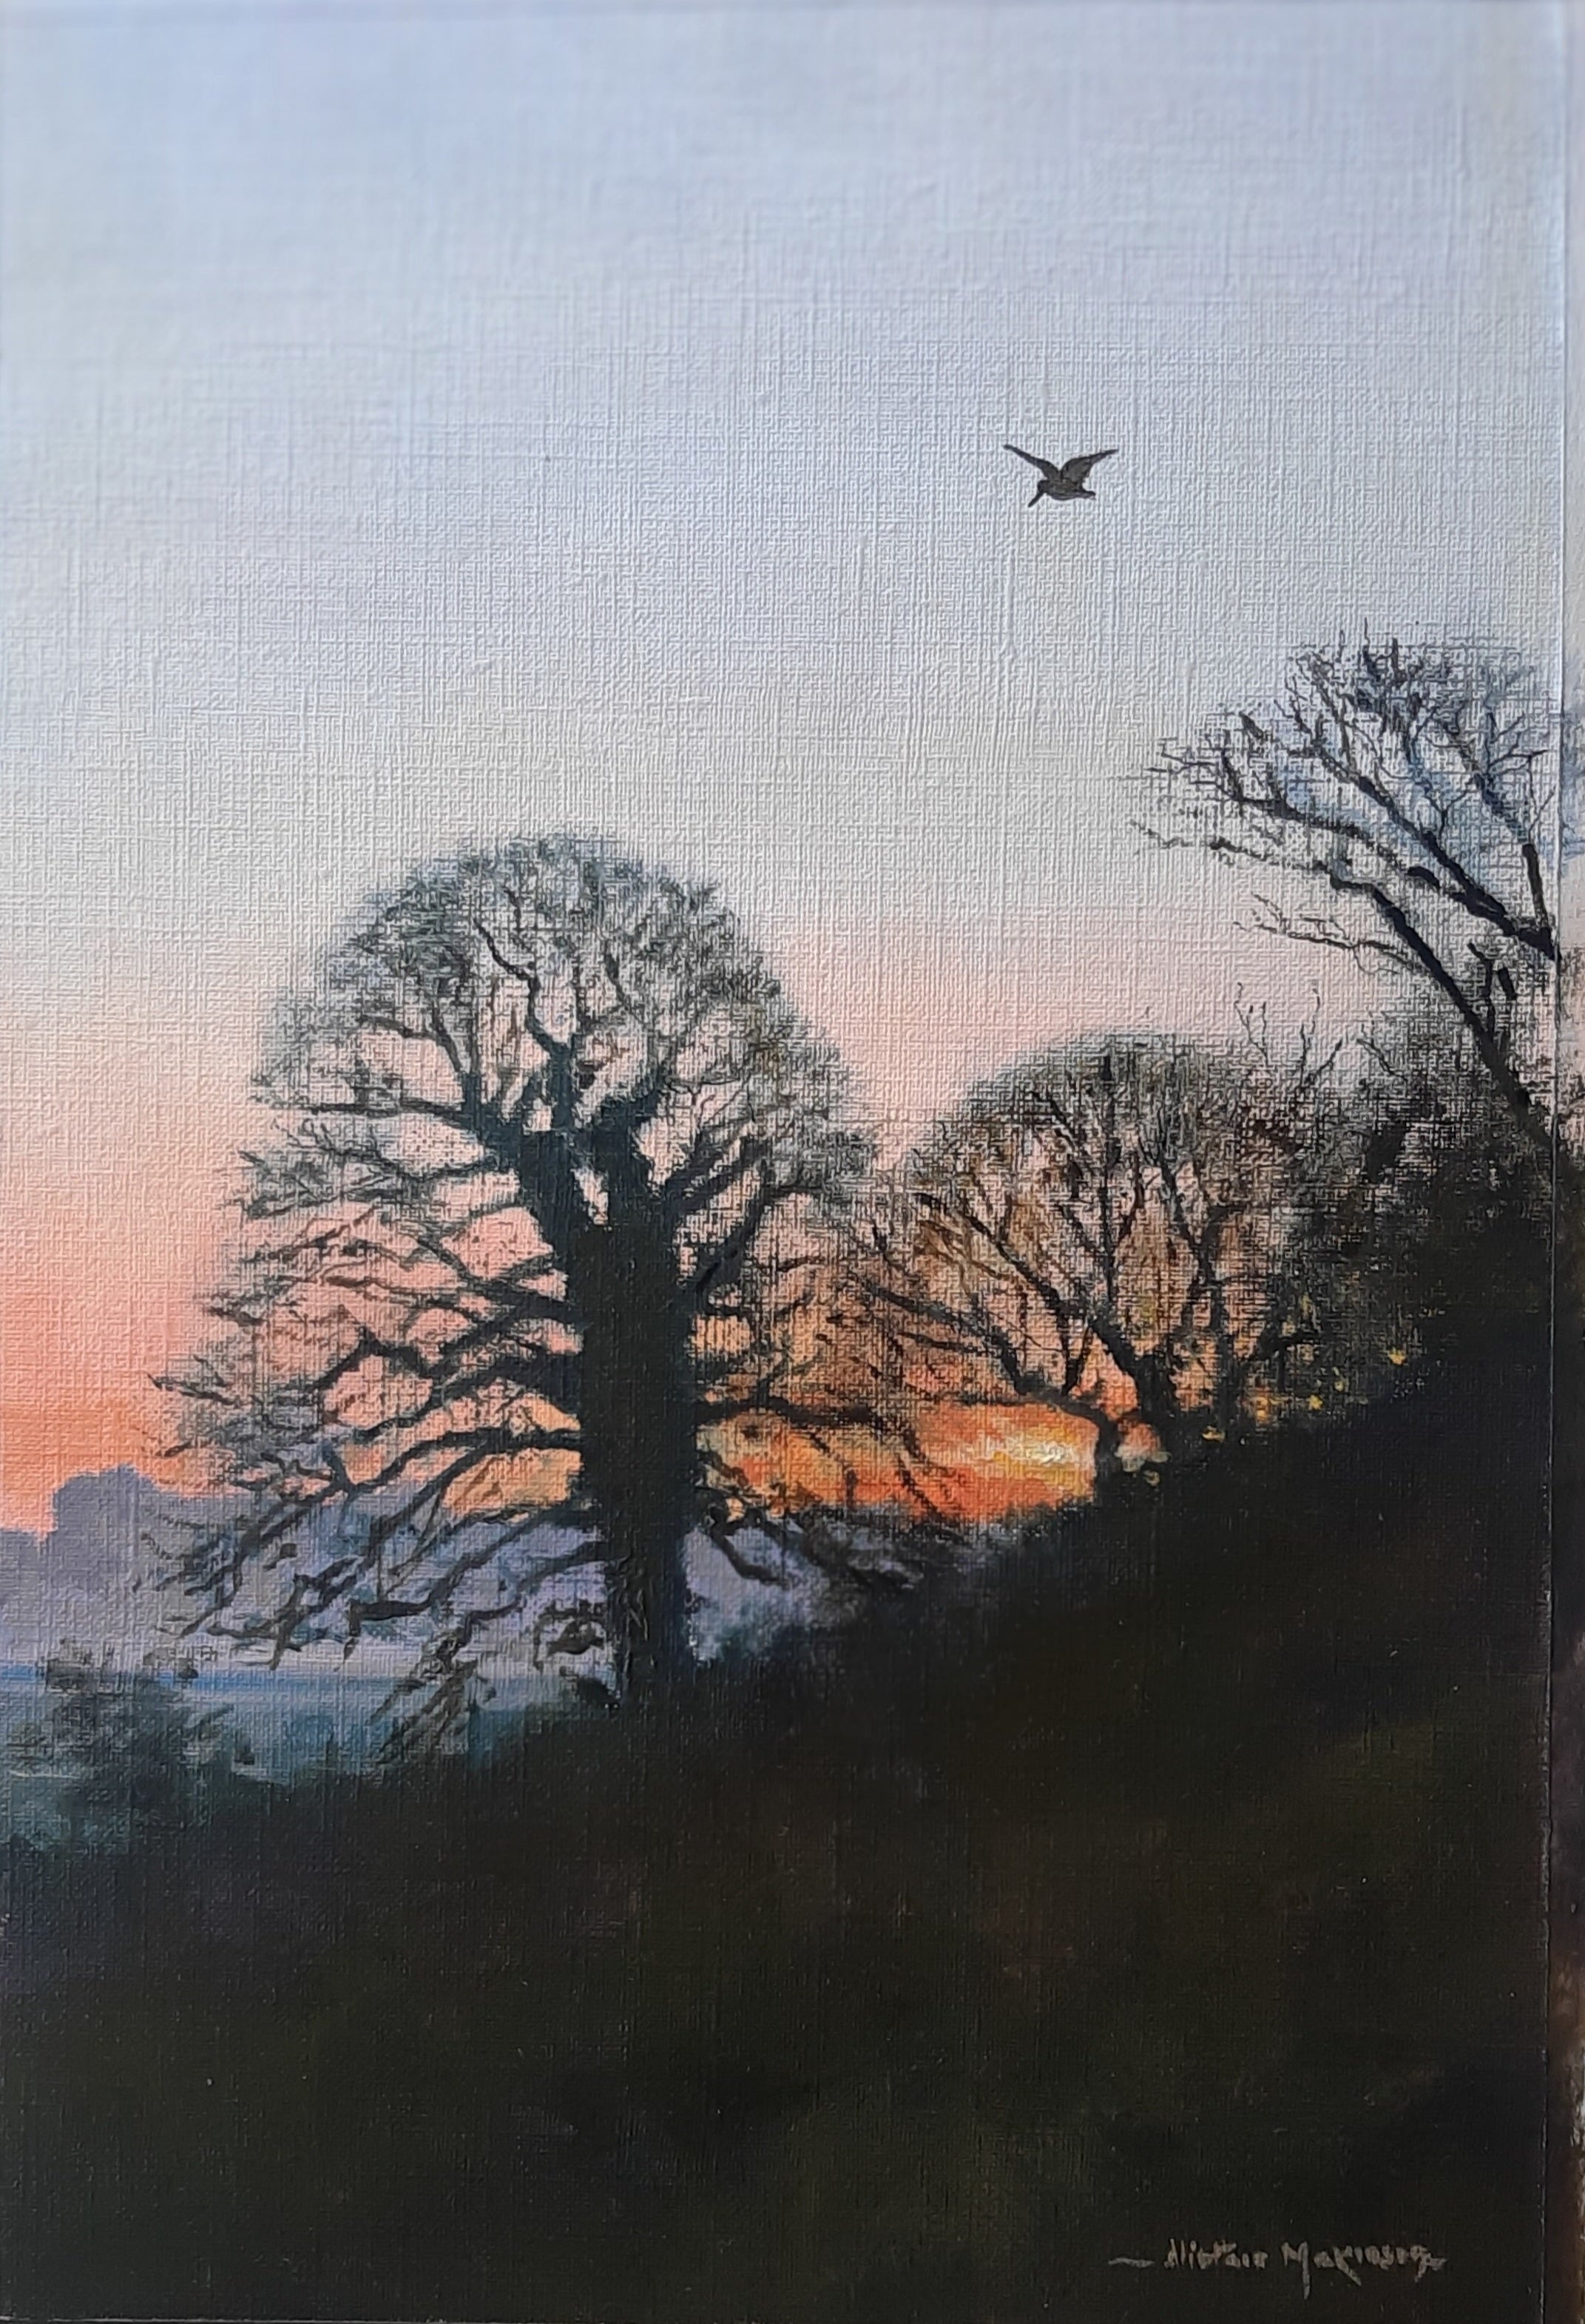 'Woodcock at Sunset' - Original Oil Painting by Alistair Makinson - 20 x 30cm